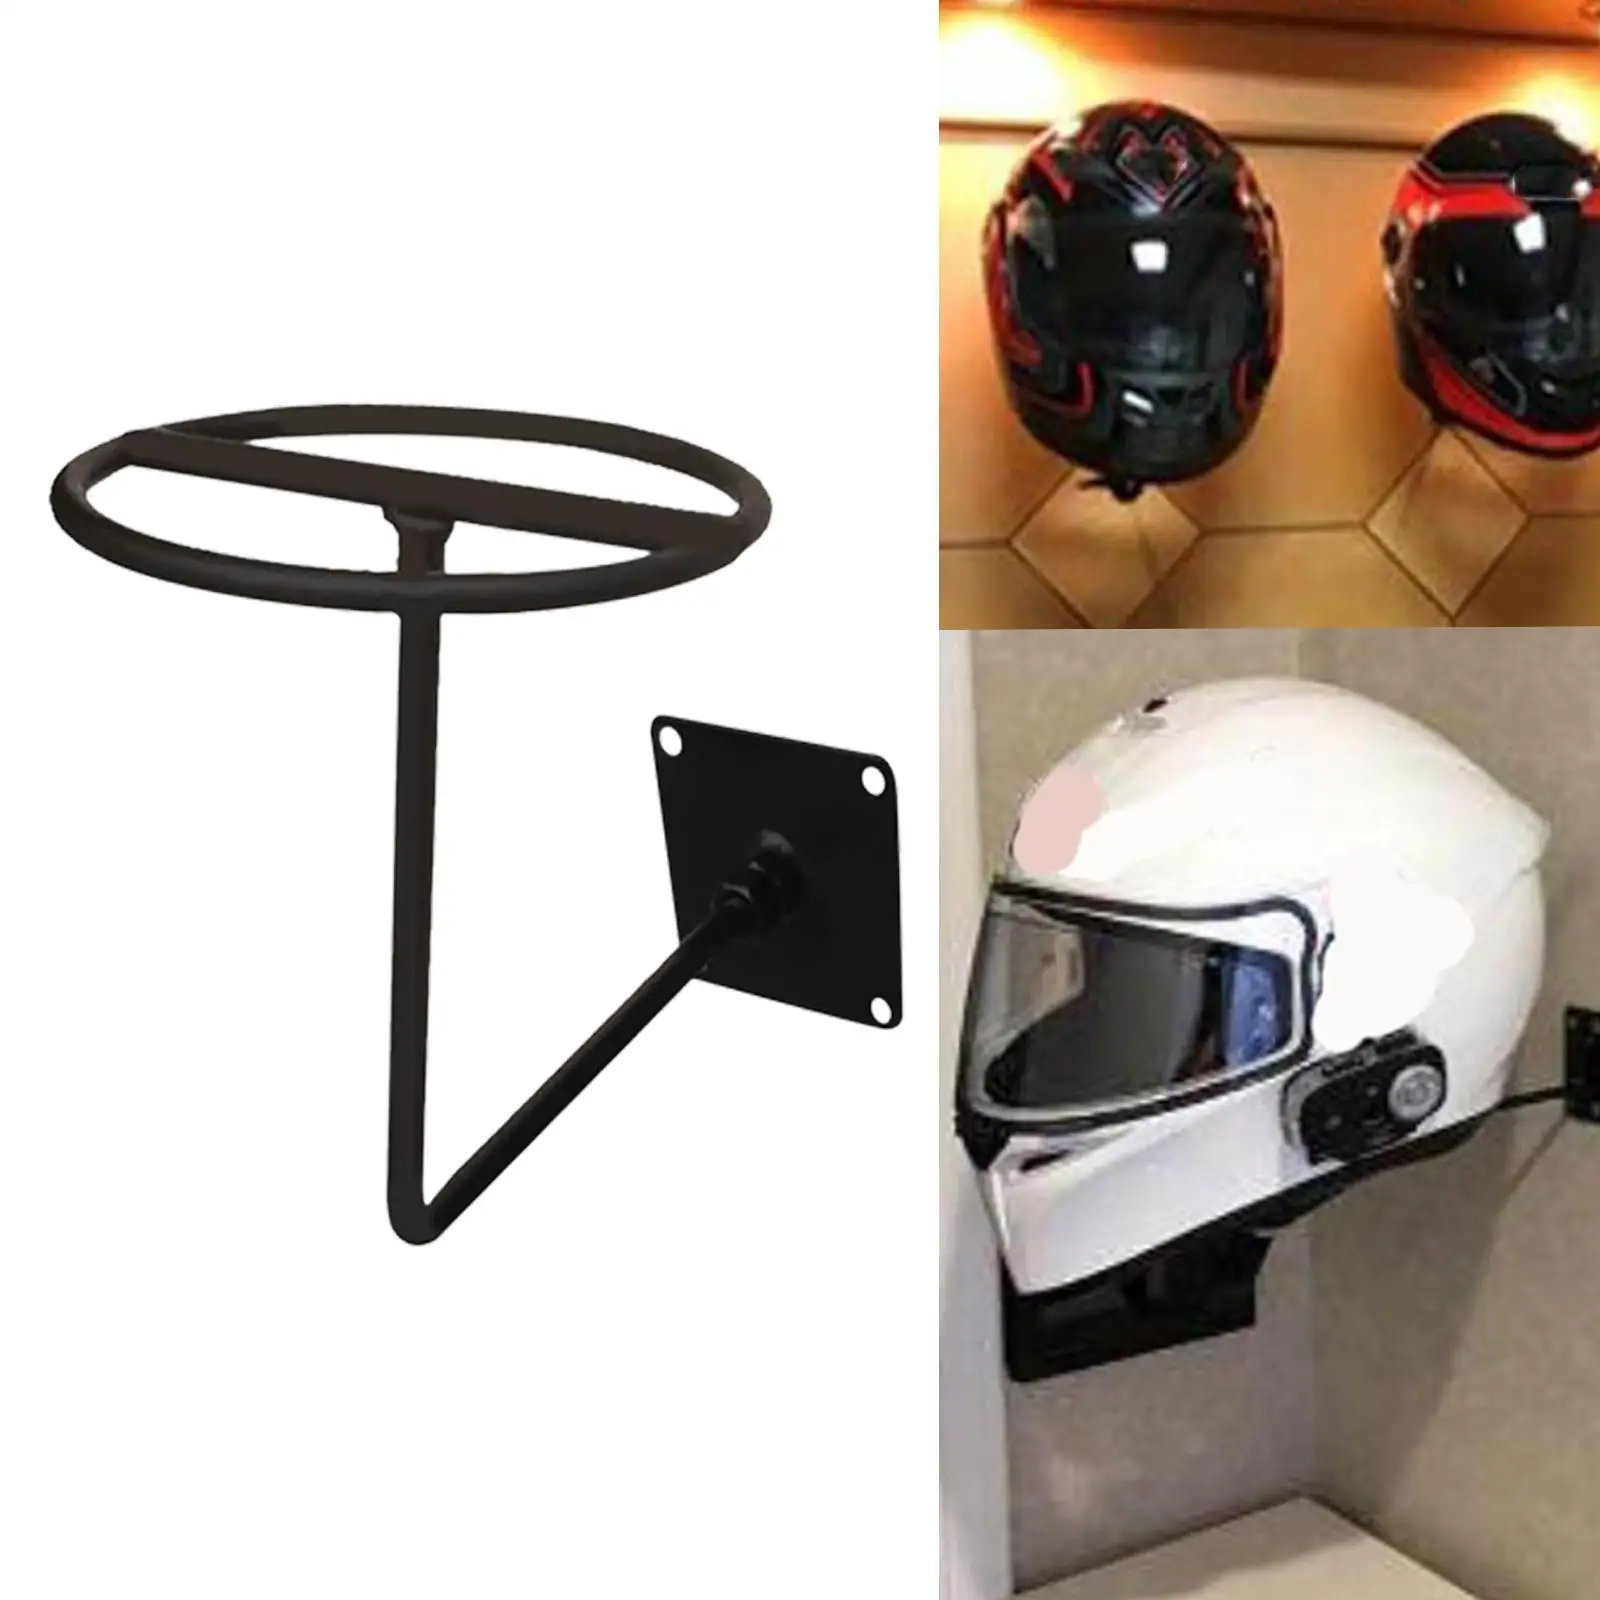  Helmet Holder Storage Wall Mounted Display Fit for Hats Home